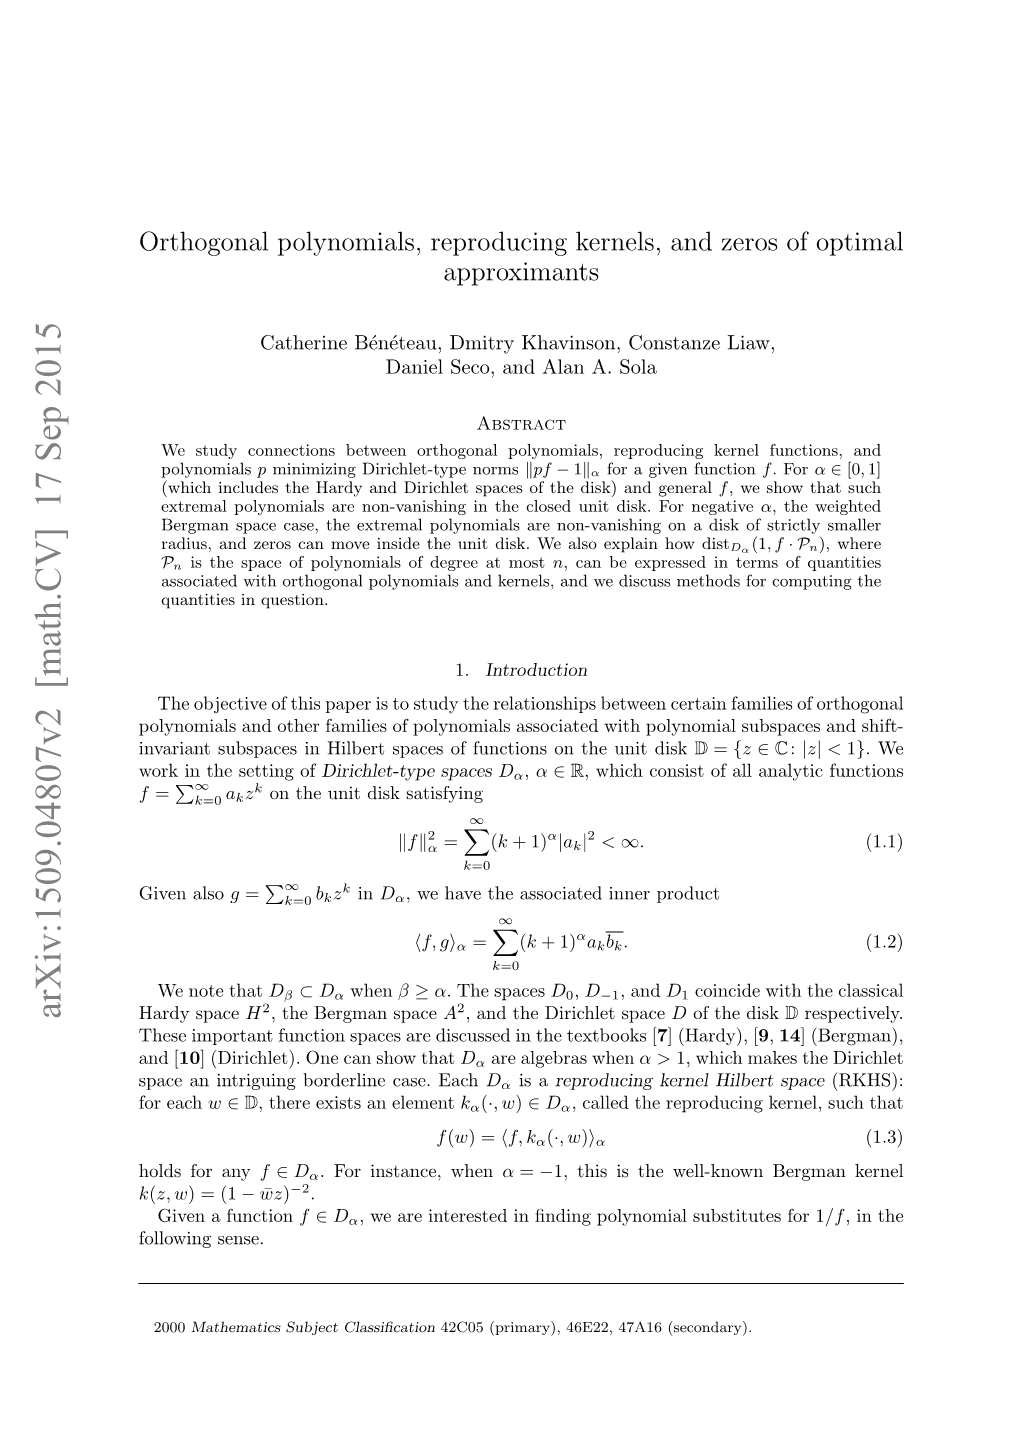 Orthogonal Polynomials, Reproducing Kernels, and Zeros of Optimal Approximants